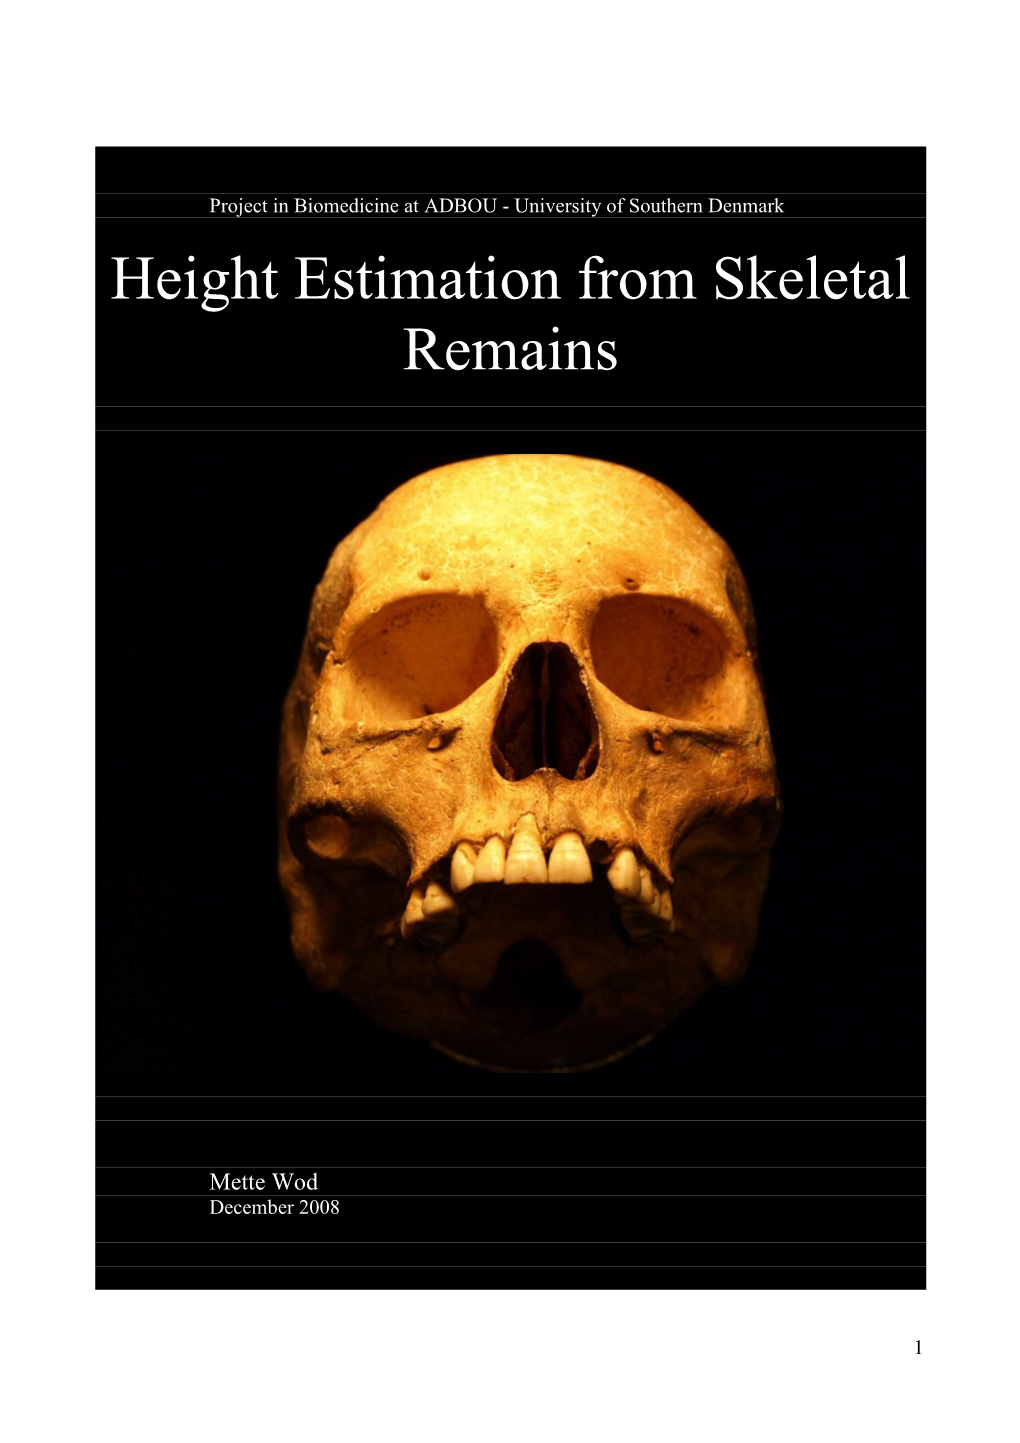 Height Estimation from Skeletal Remains